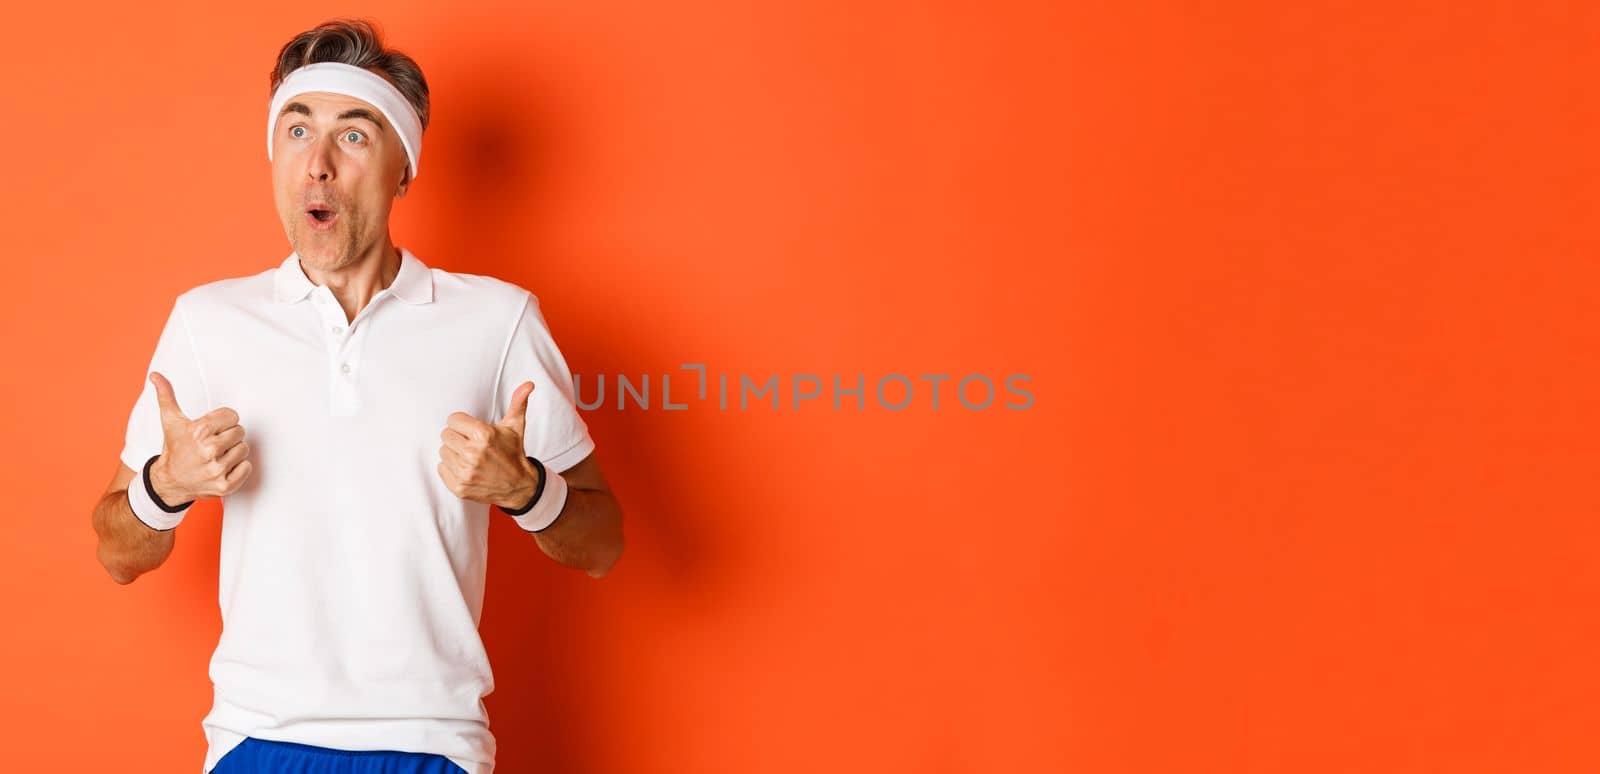 Concept of sport, fitness and lifestyle. Portrait of amazed and excited middle-aged sportsman, looking at upper left corner at something awesome, showing thumbs-up, orange background.